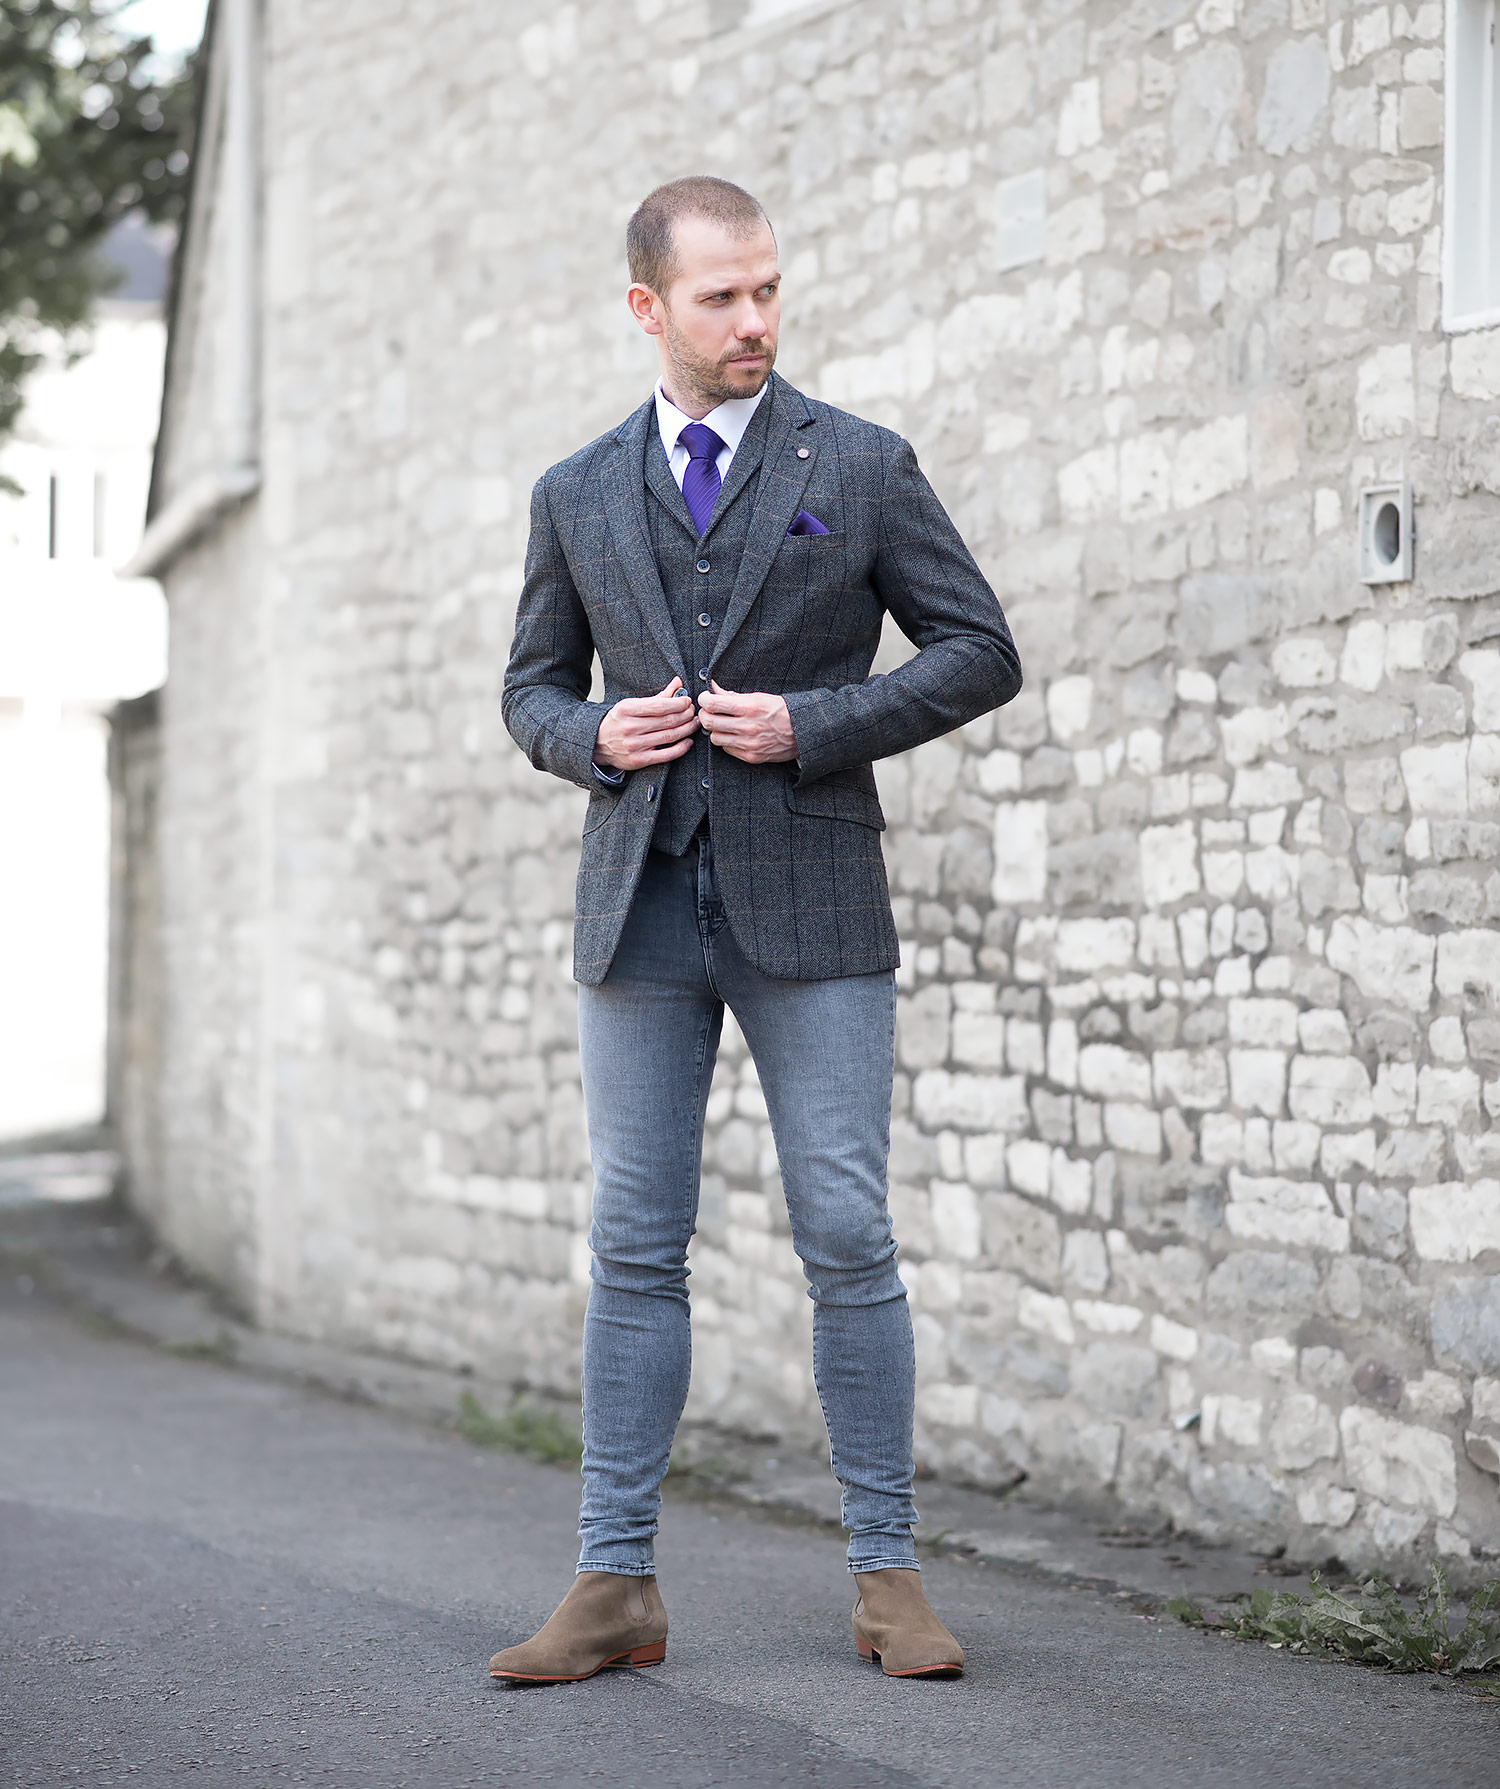 Tweed Suit With J Brand Skinny Jeans Outfit | Your Average Guy